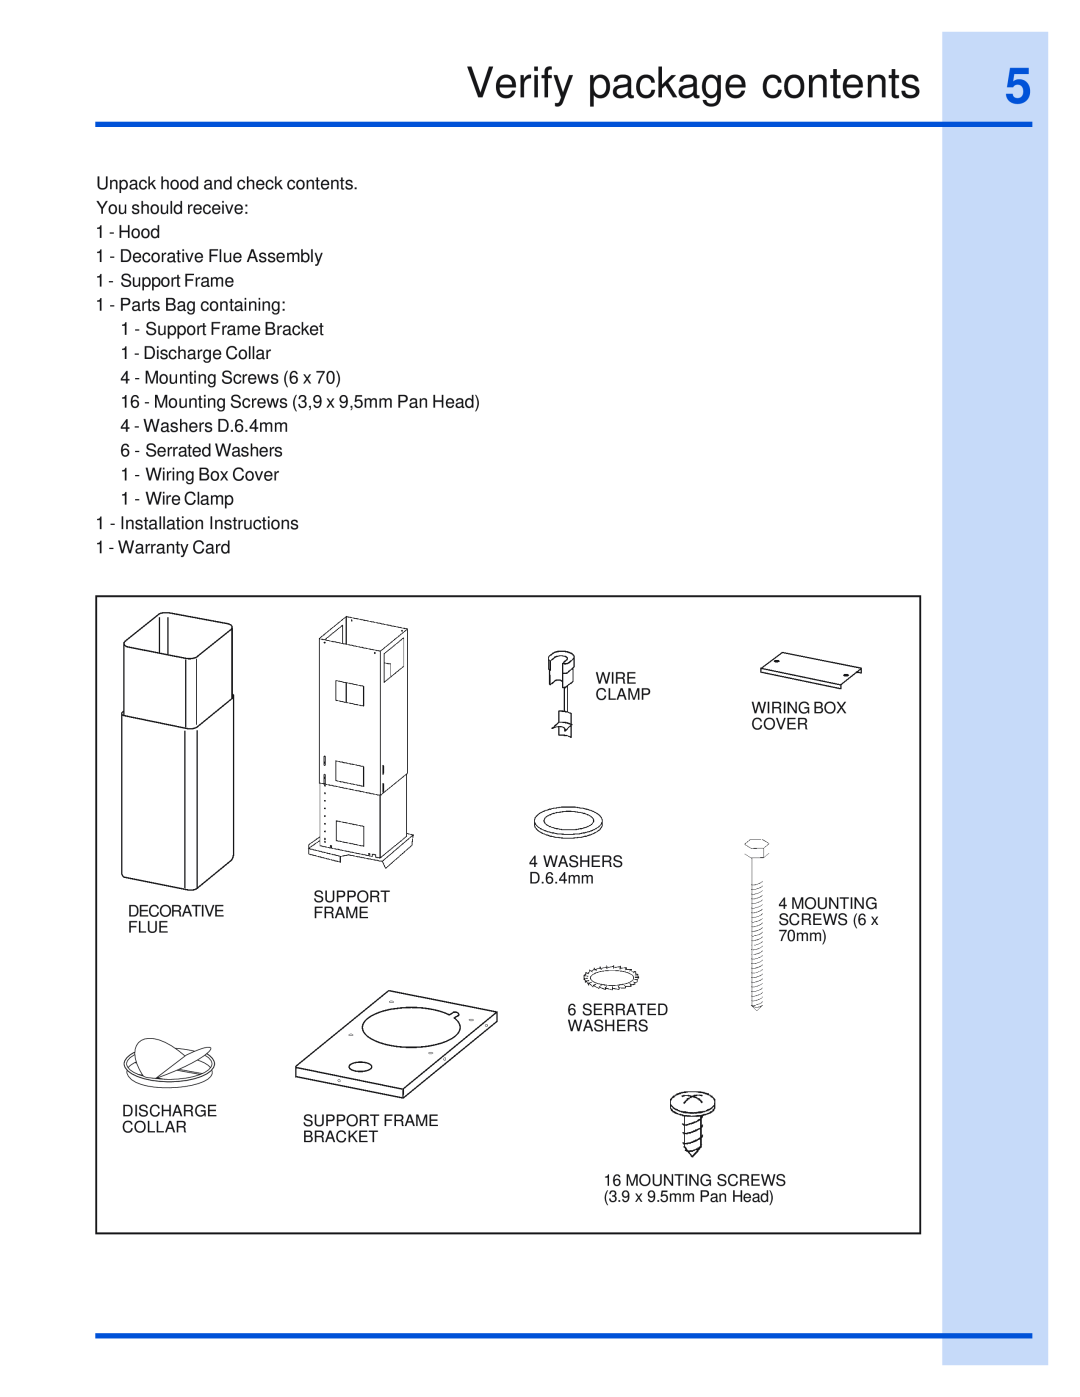 Electrolux 316495008 installation instructions Verify package contents 